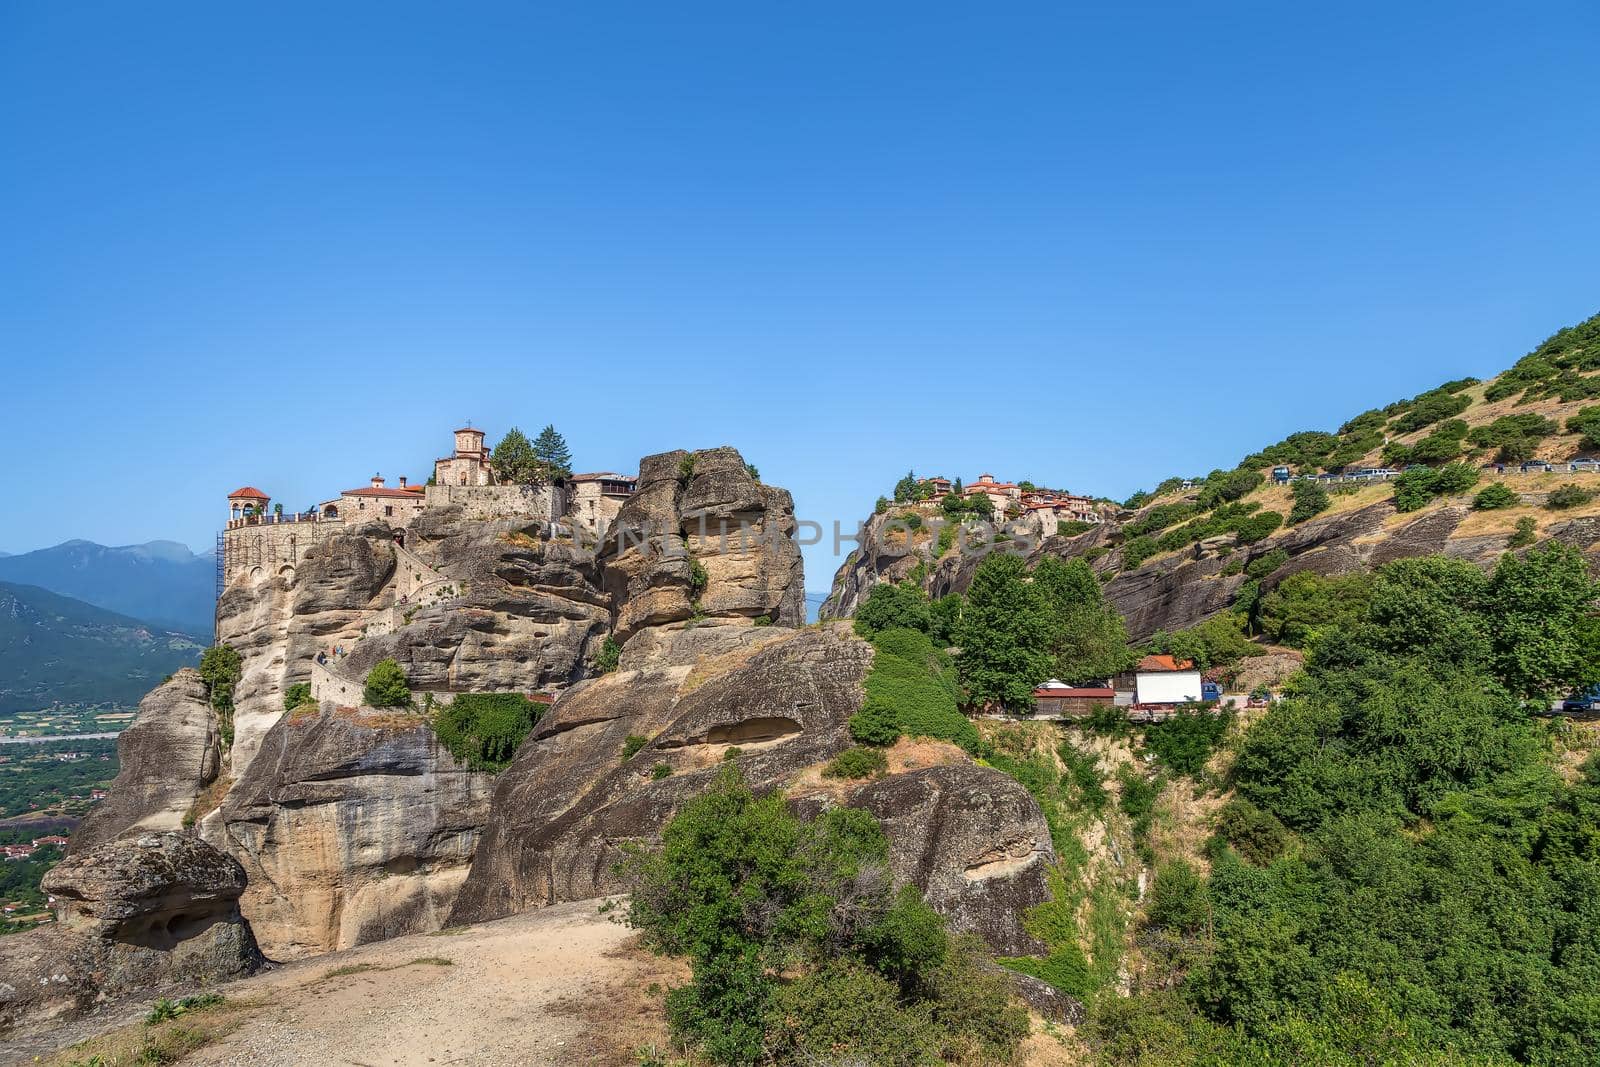 View of rock with Monastery of Varlaam and Great Meteoron in Meteora, Greece